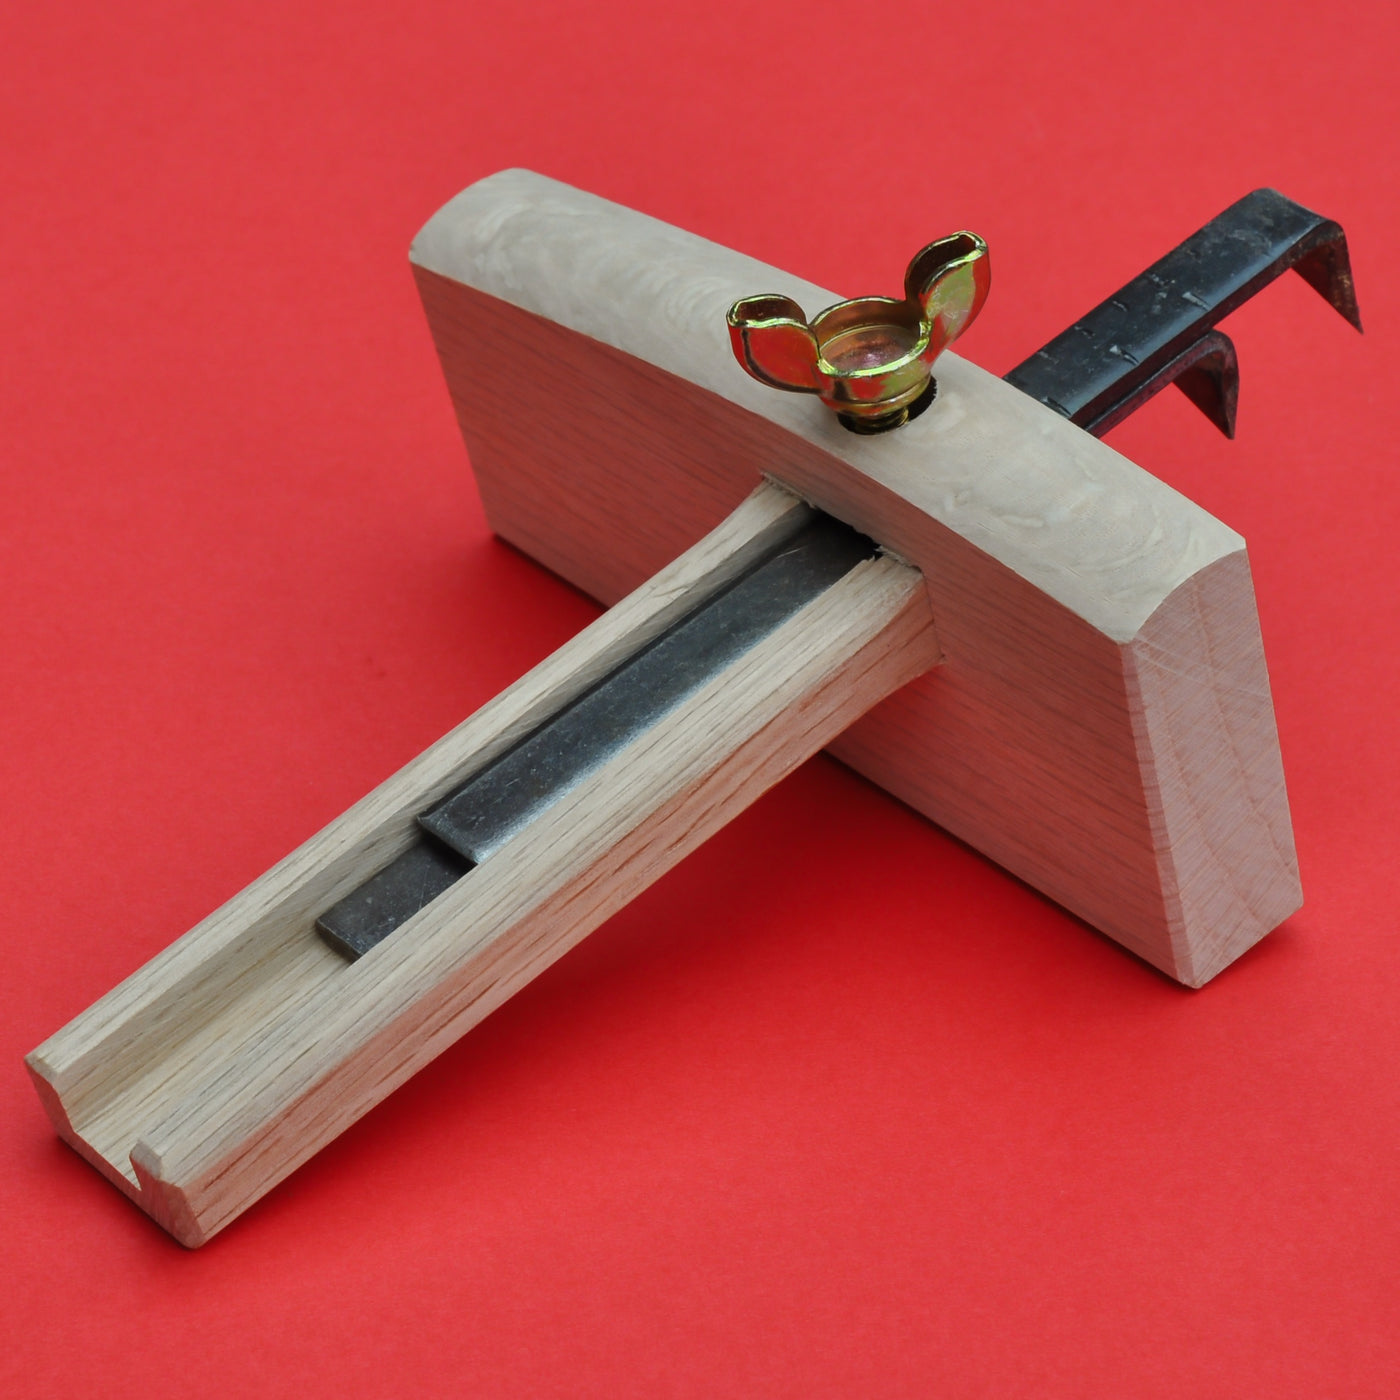 Make Your Own Kebiki: The Essential Japanese Woodworking Tool - 3